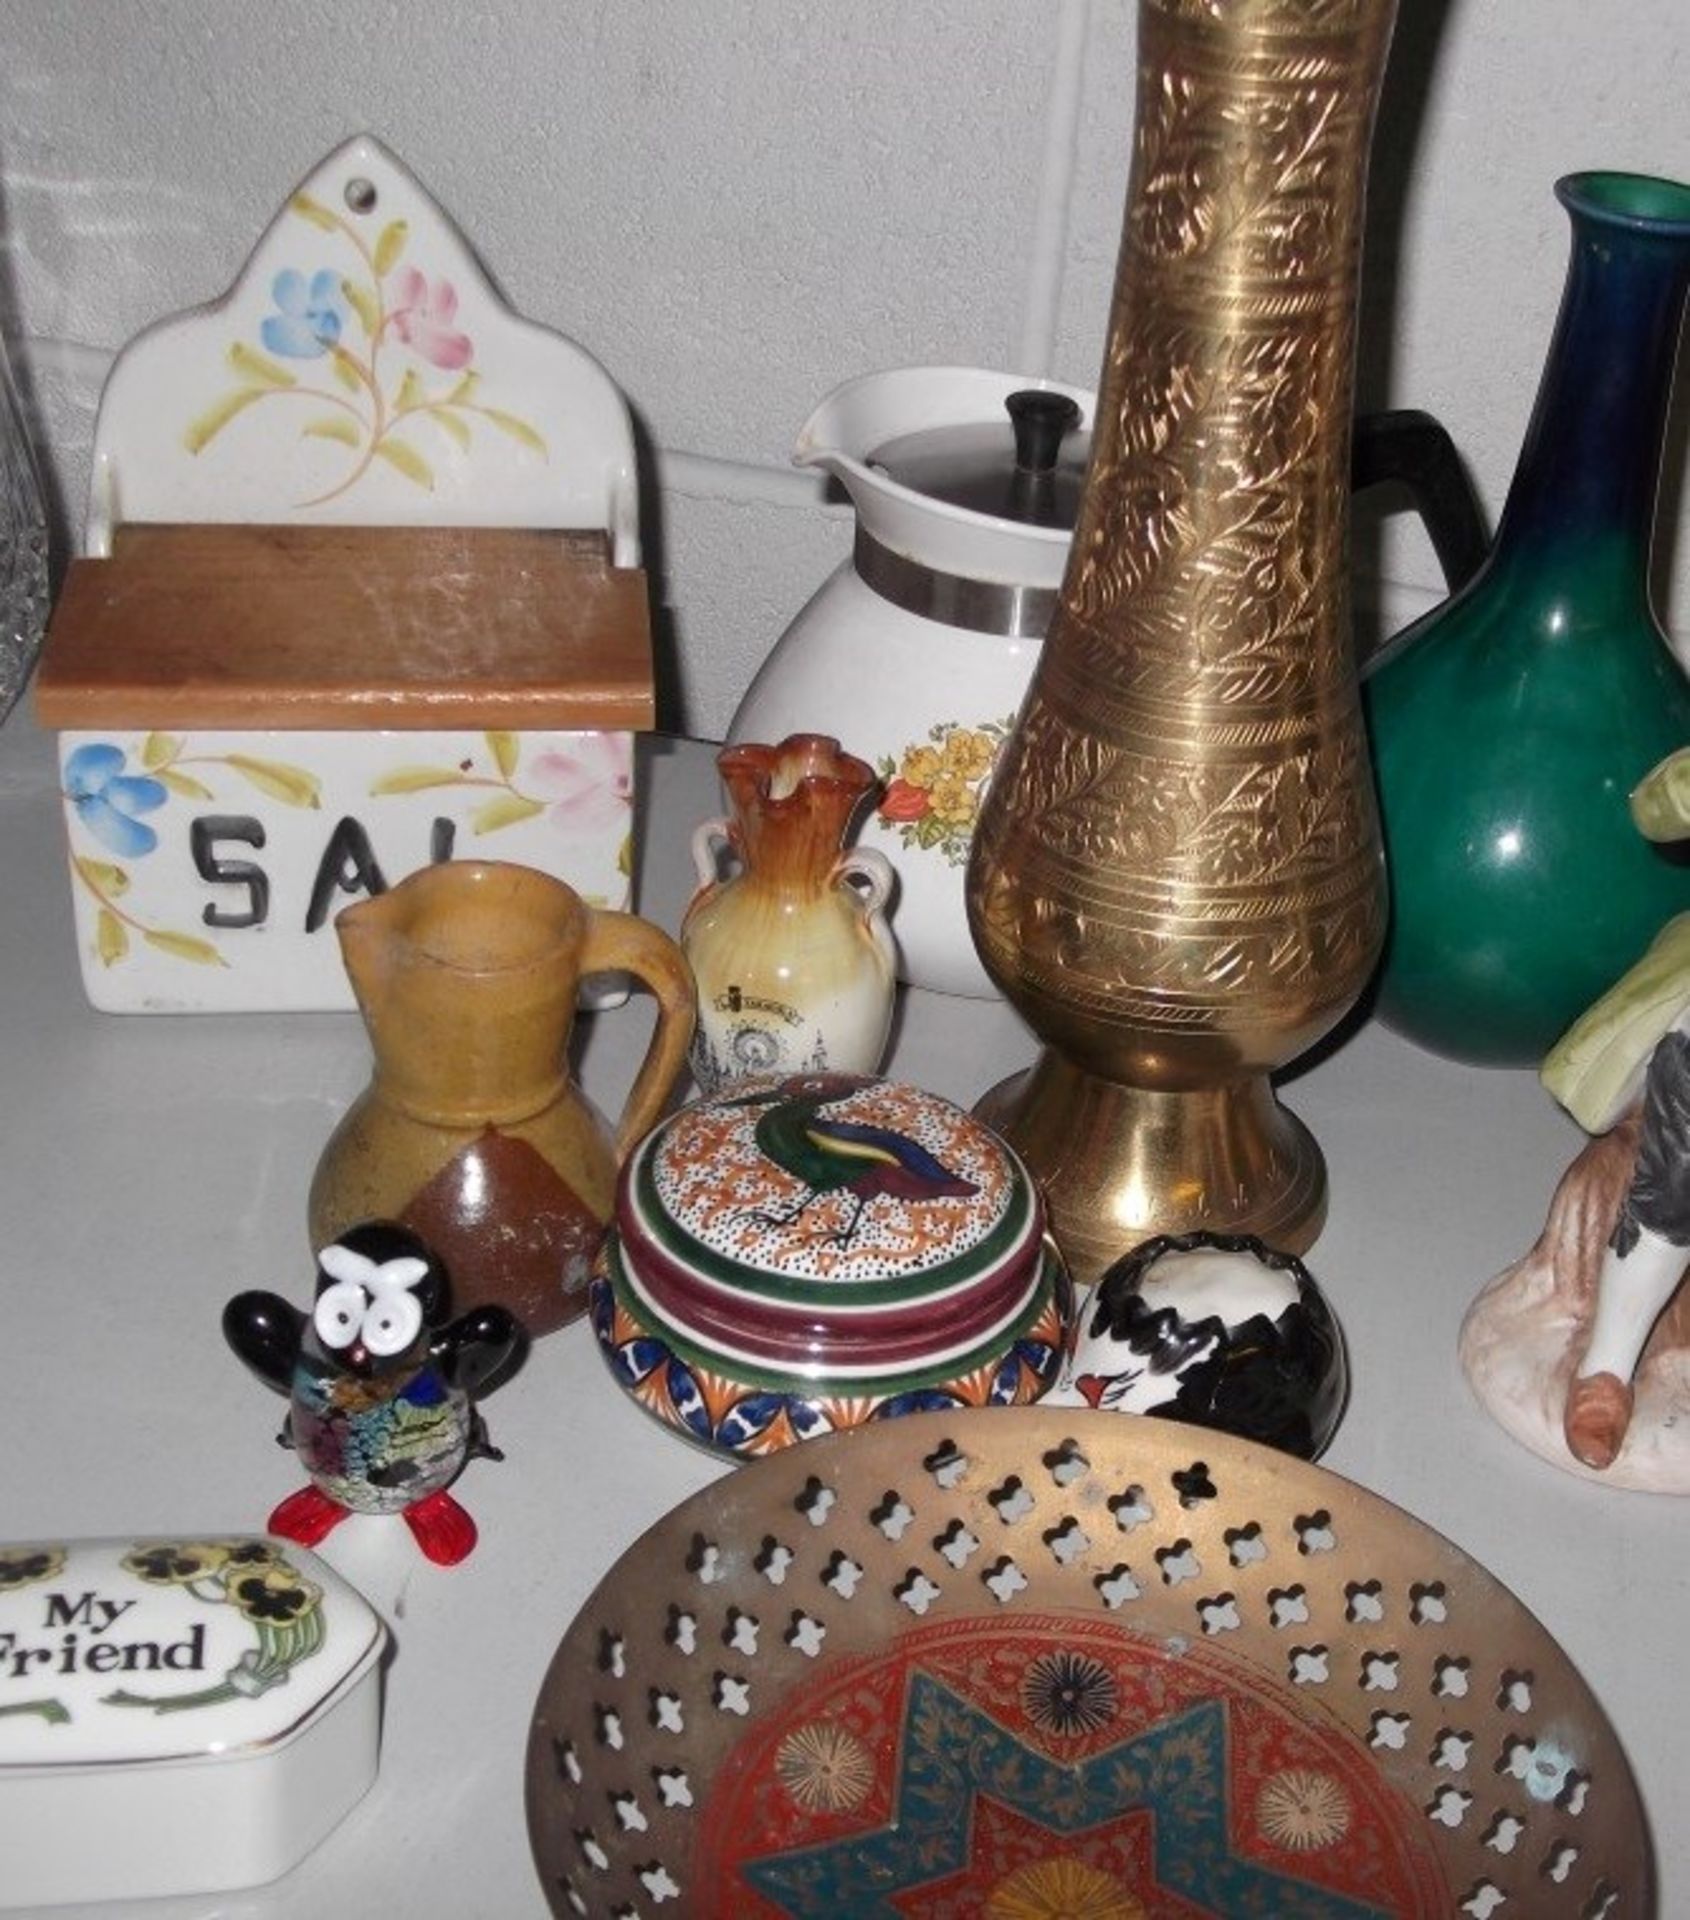 37 x Assorted Decorative Items - Ceramics / Ornaments / Figurines - Pre-Loved, Mostly Of American - Image 7 of 8